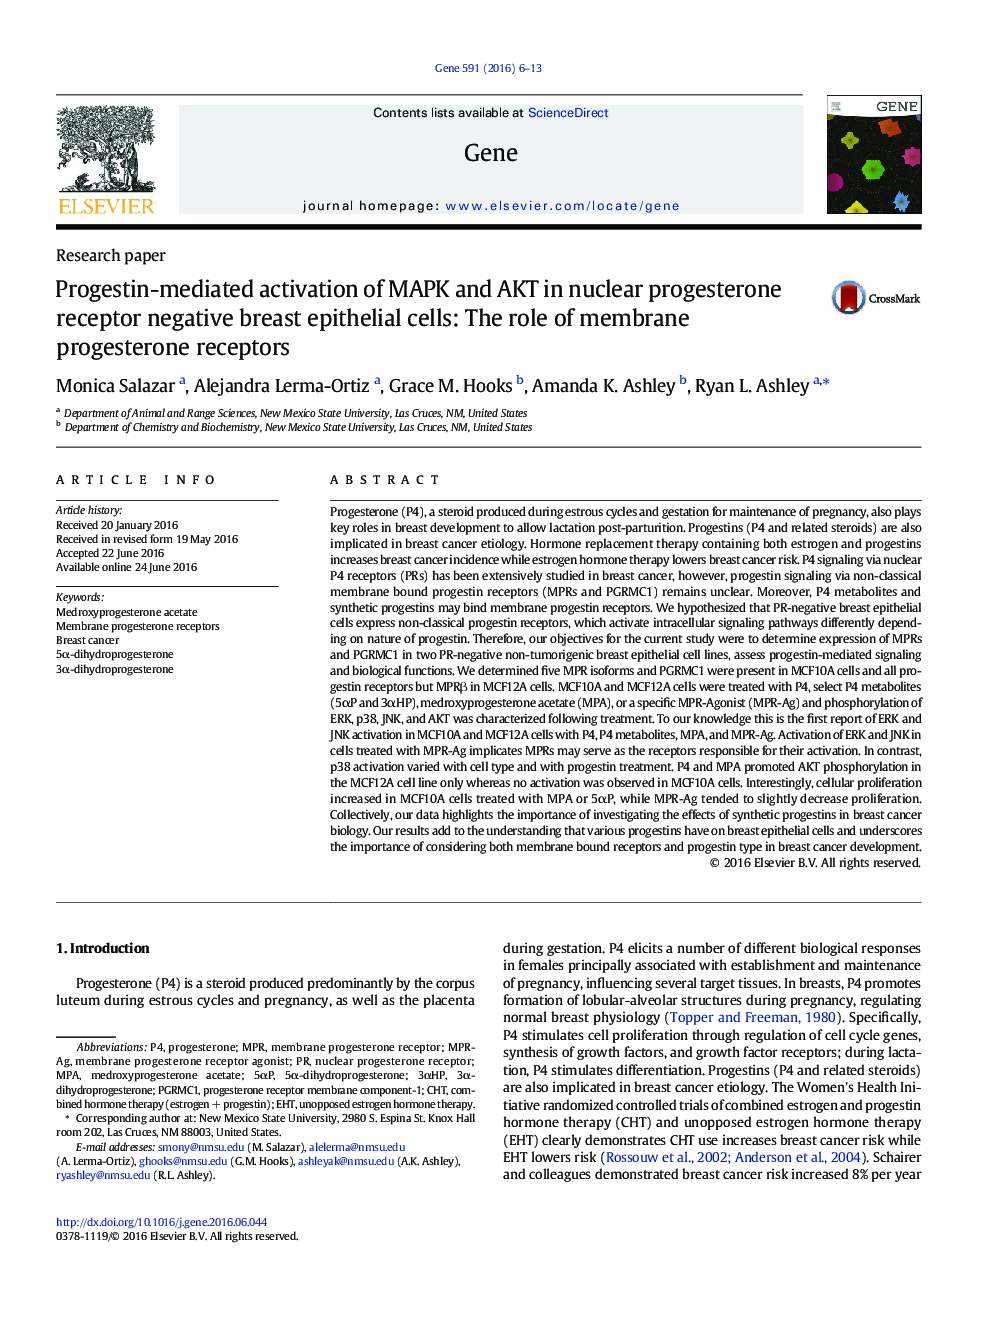 Progestin-mediated activation of MAPK and AKT in nuclear progesterone receptor negative breast epithelial cells: The role of membrane progesterone receptors